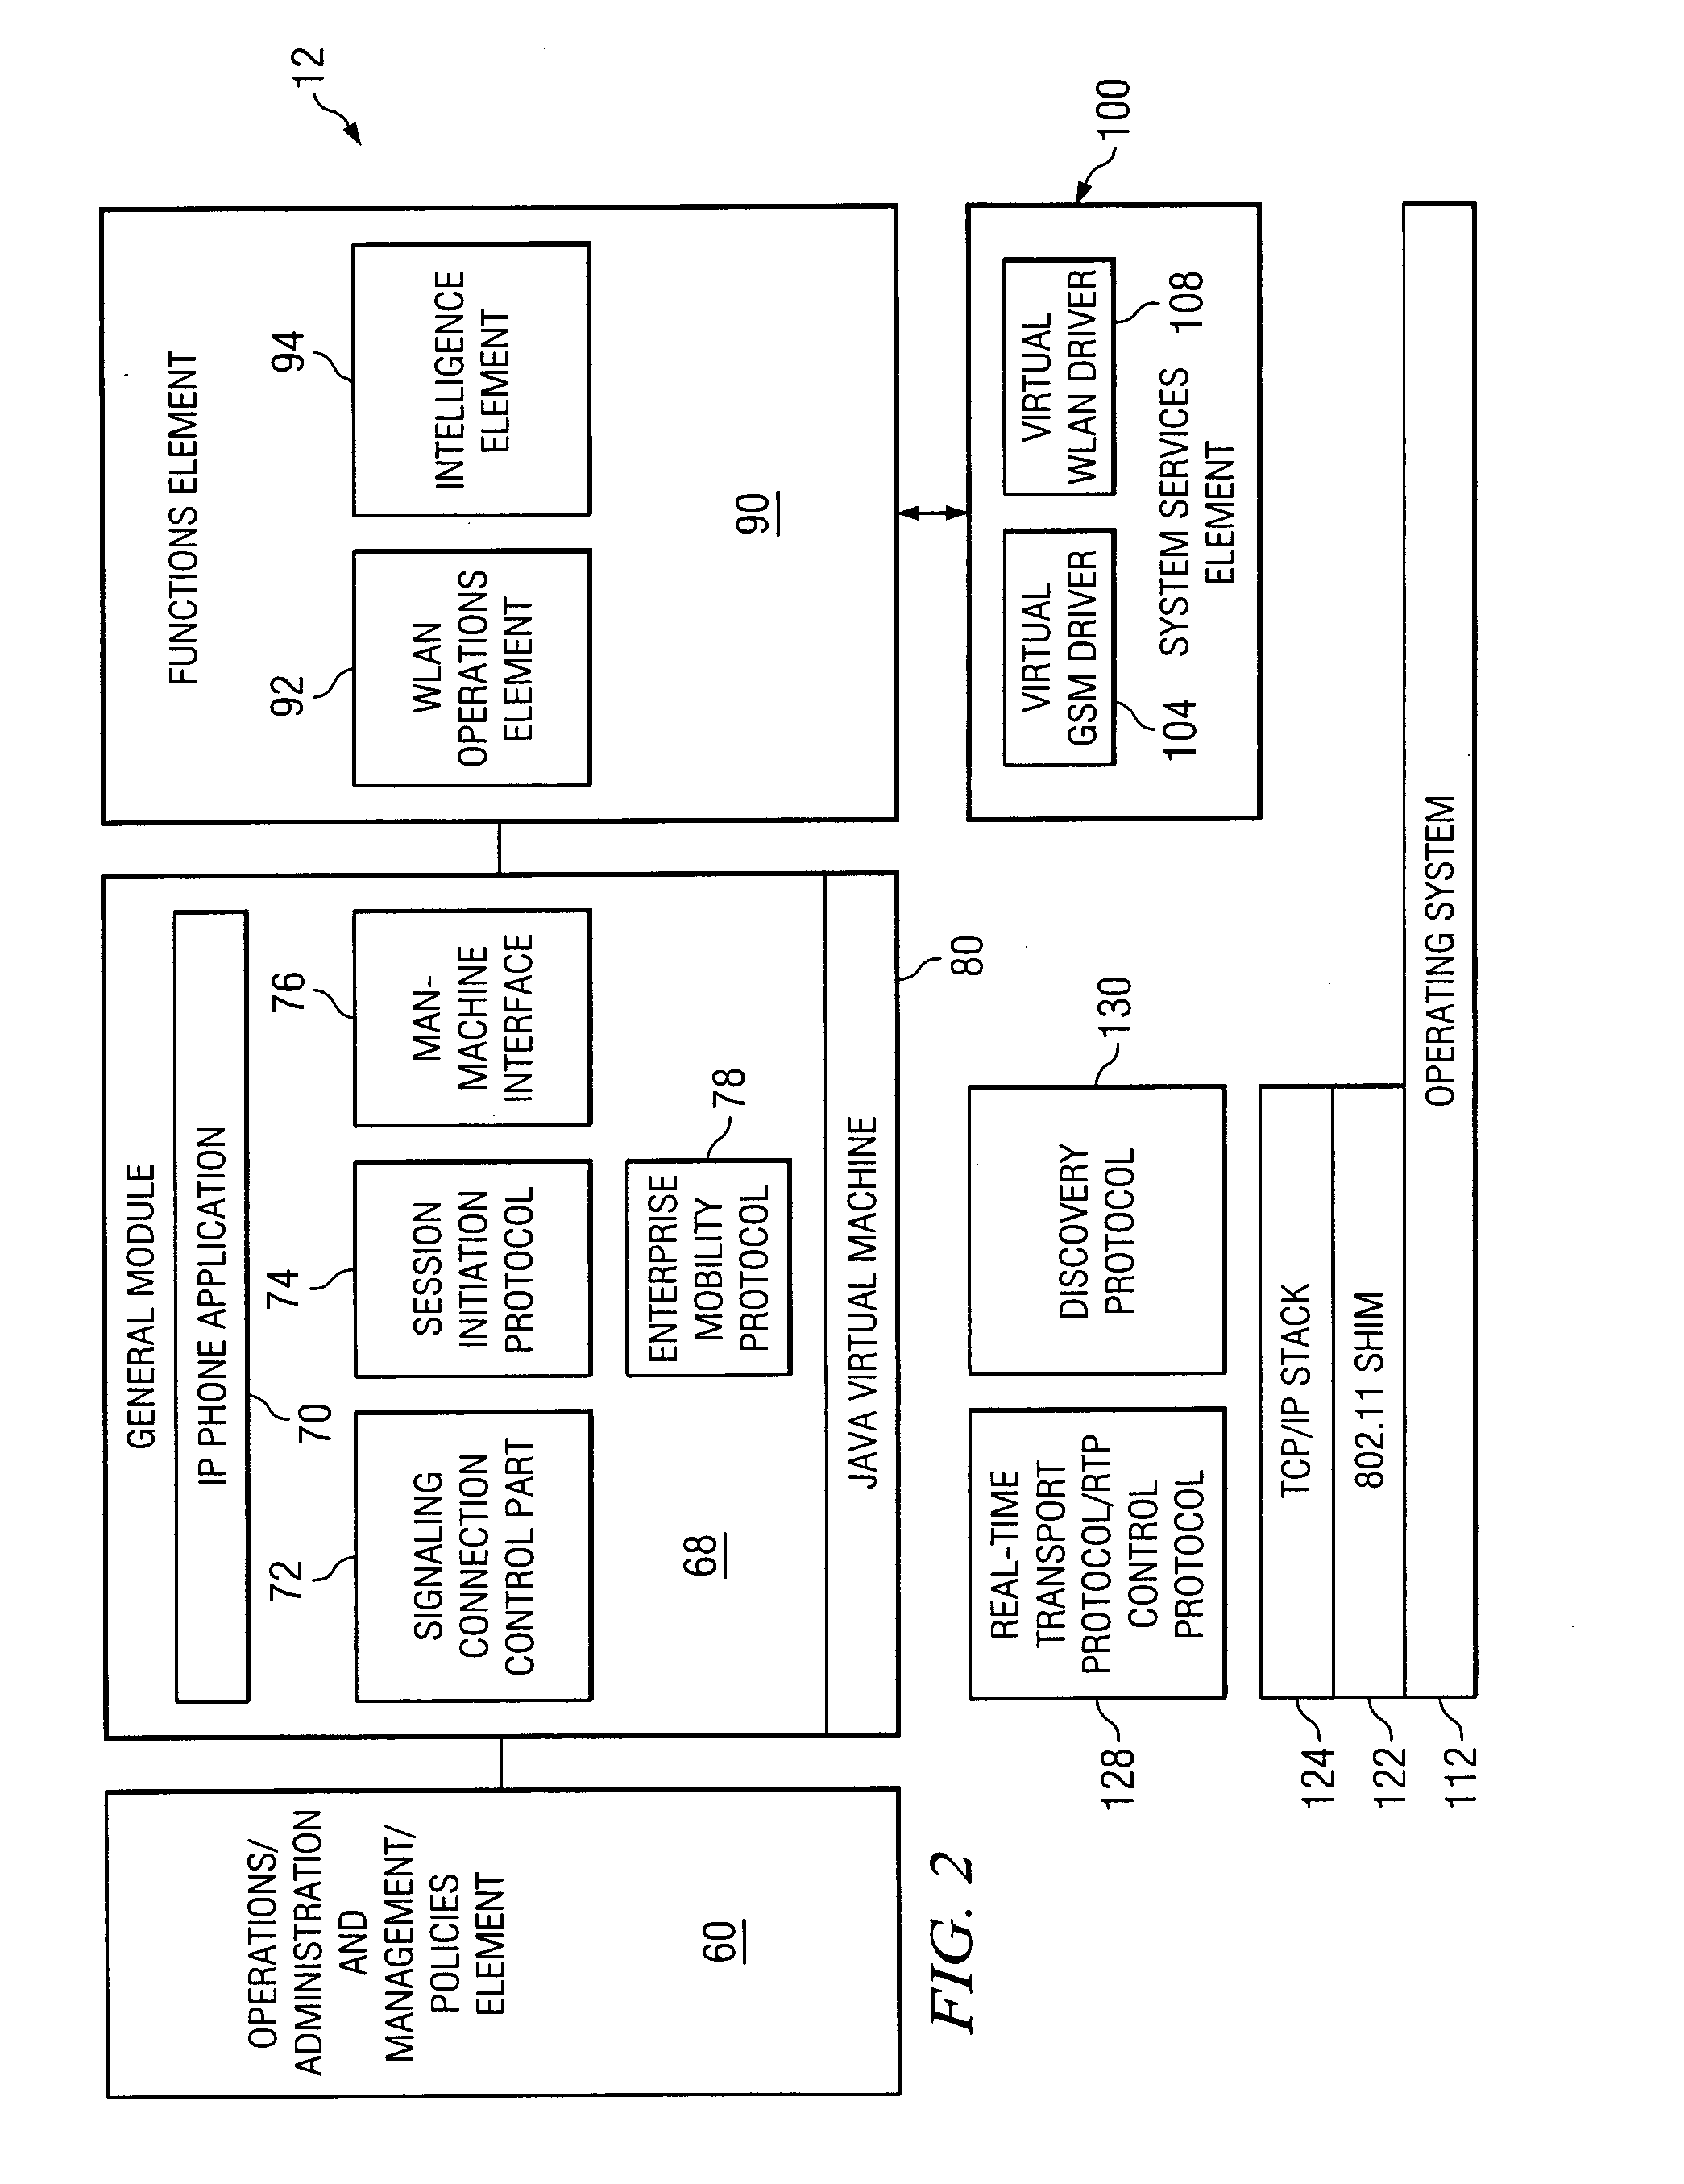 System and method for providing transparency in delivering private network features